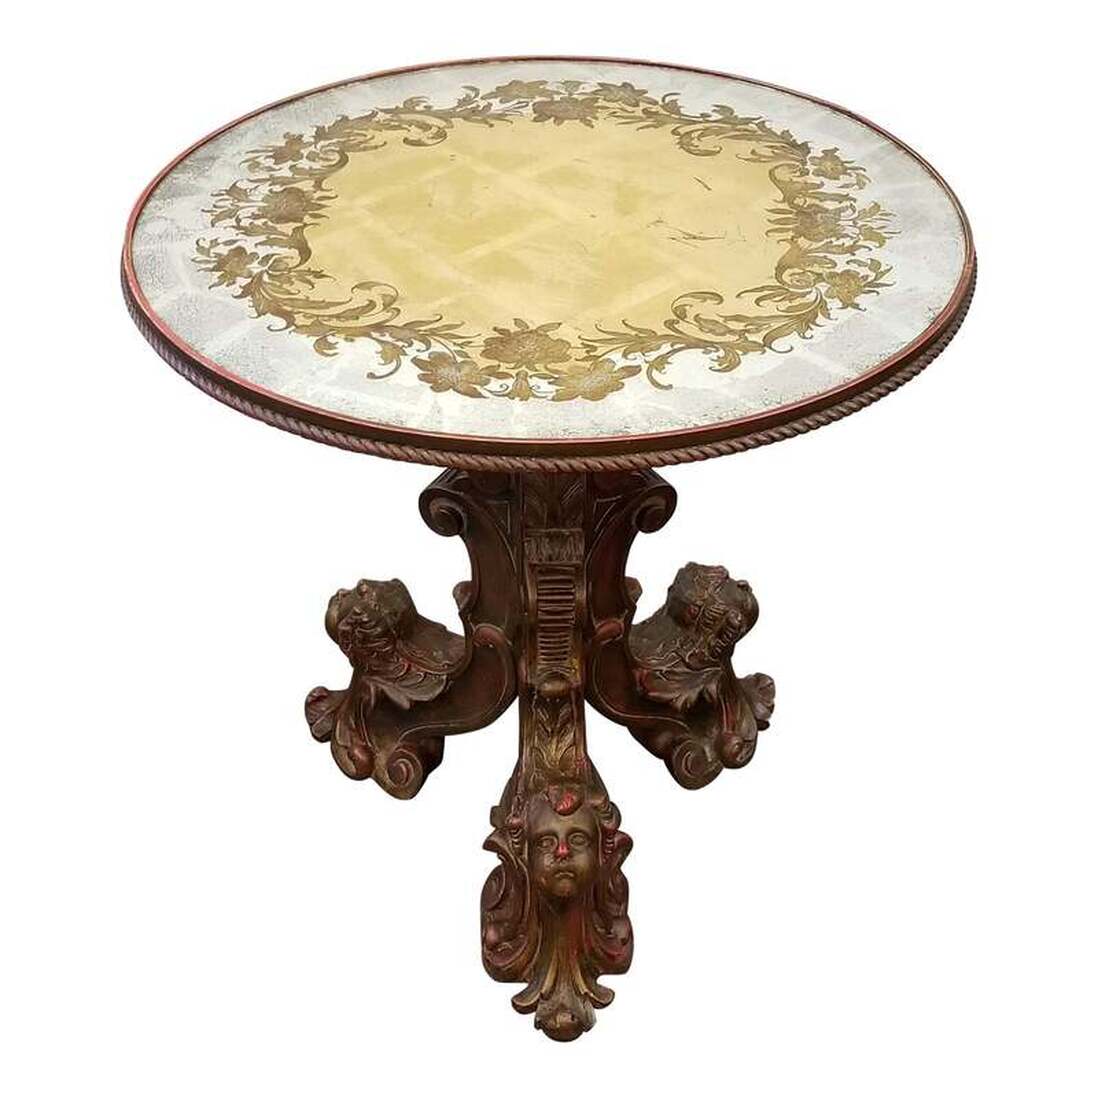 Round Italian center table with ornately carved gilt wood tripod base features putti heads and highlighting with red paint. At the top of the baluster stem sits a hand crafted verre eglomise top gilded in silver and gold with etched and painted images.